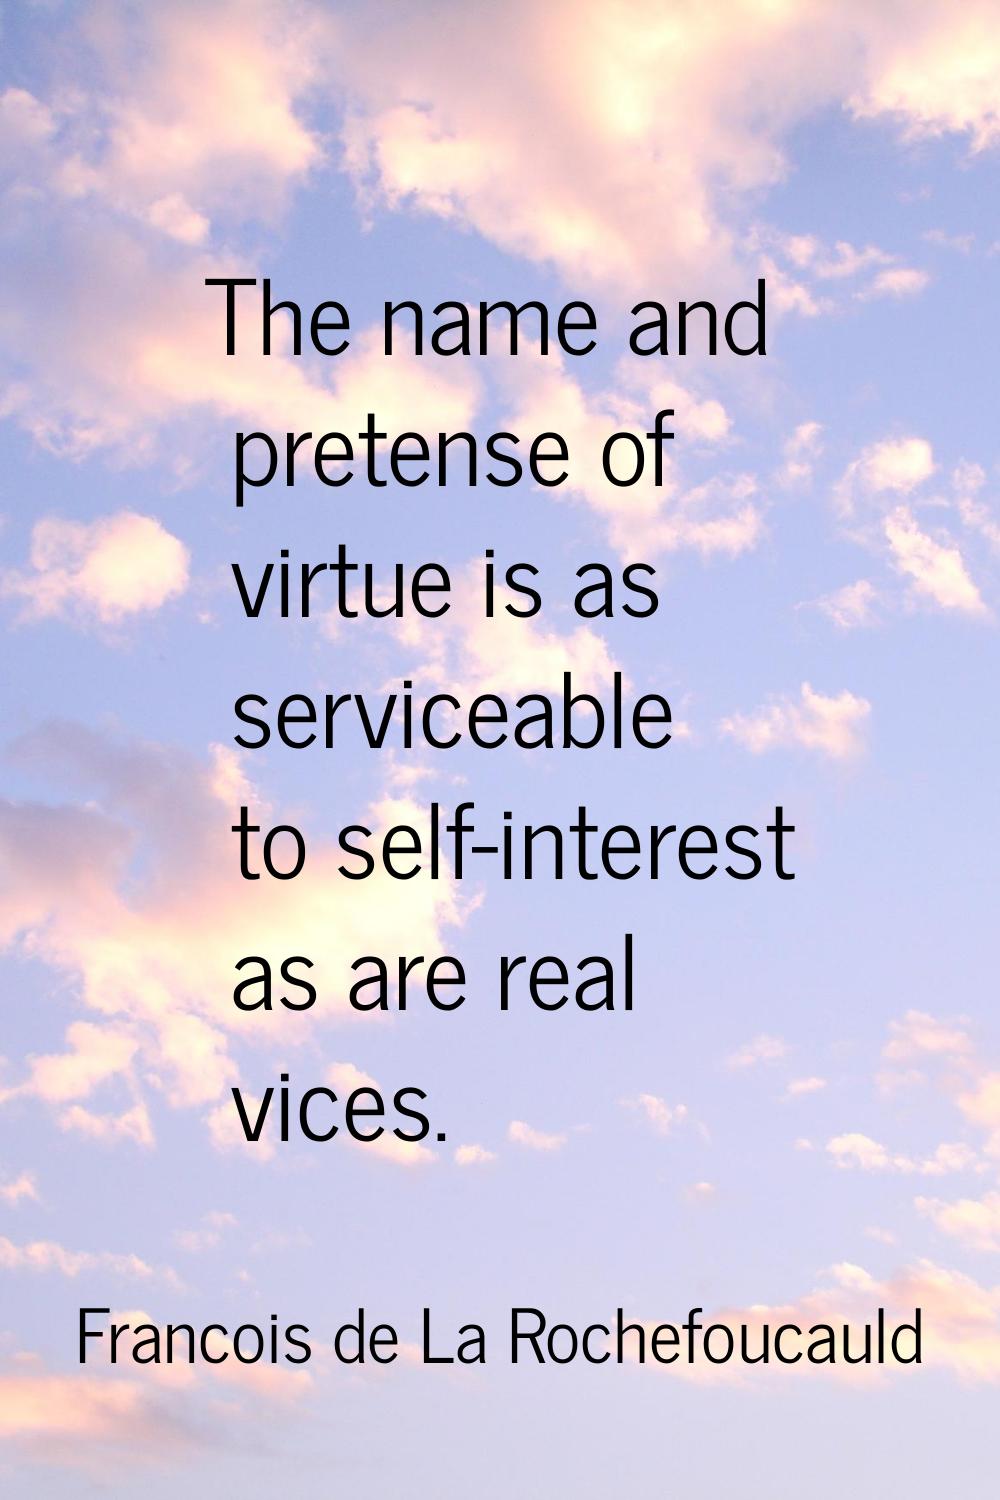 The name and pretense of virtue is as serviceable to self-interest as are real vices.